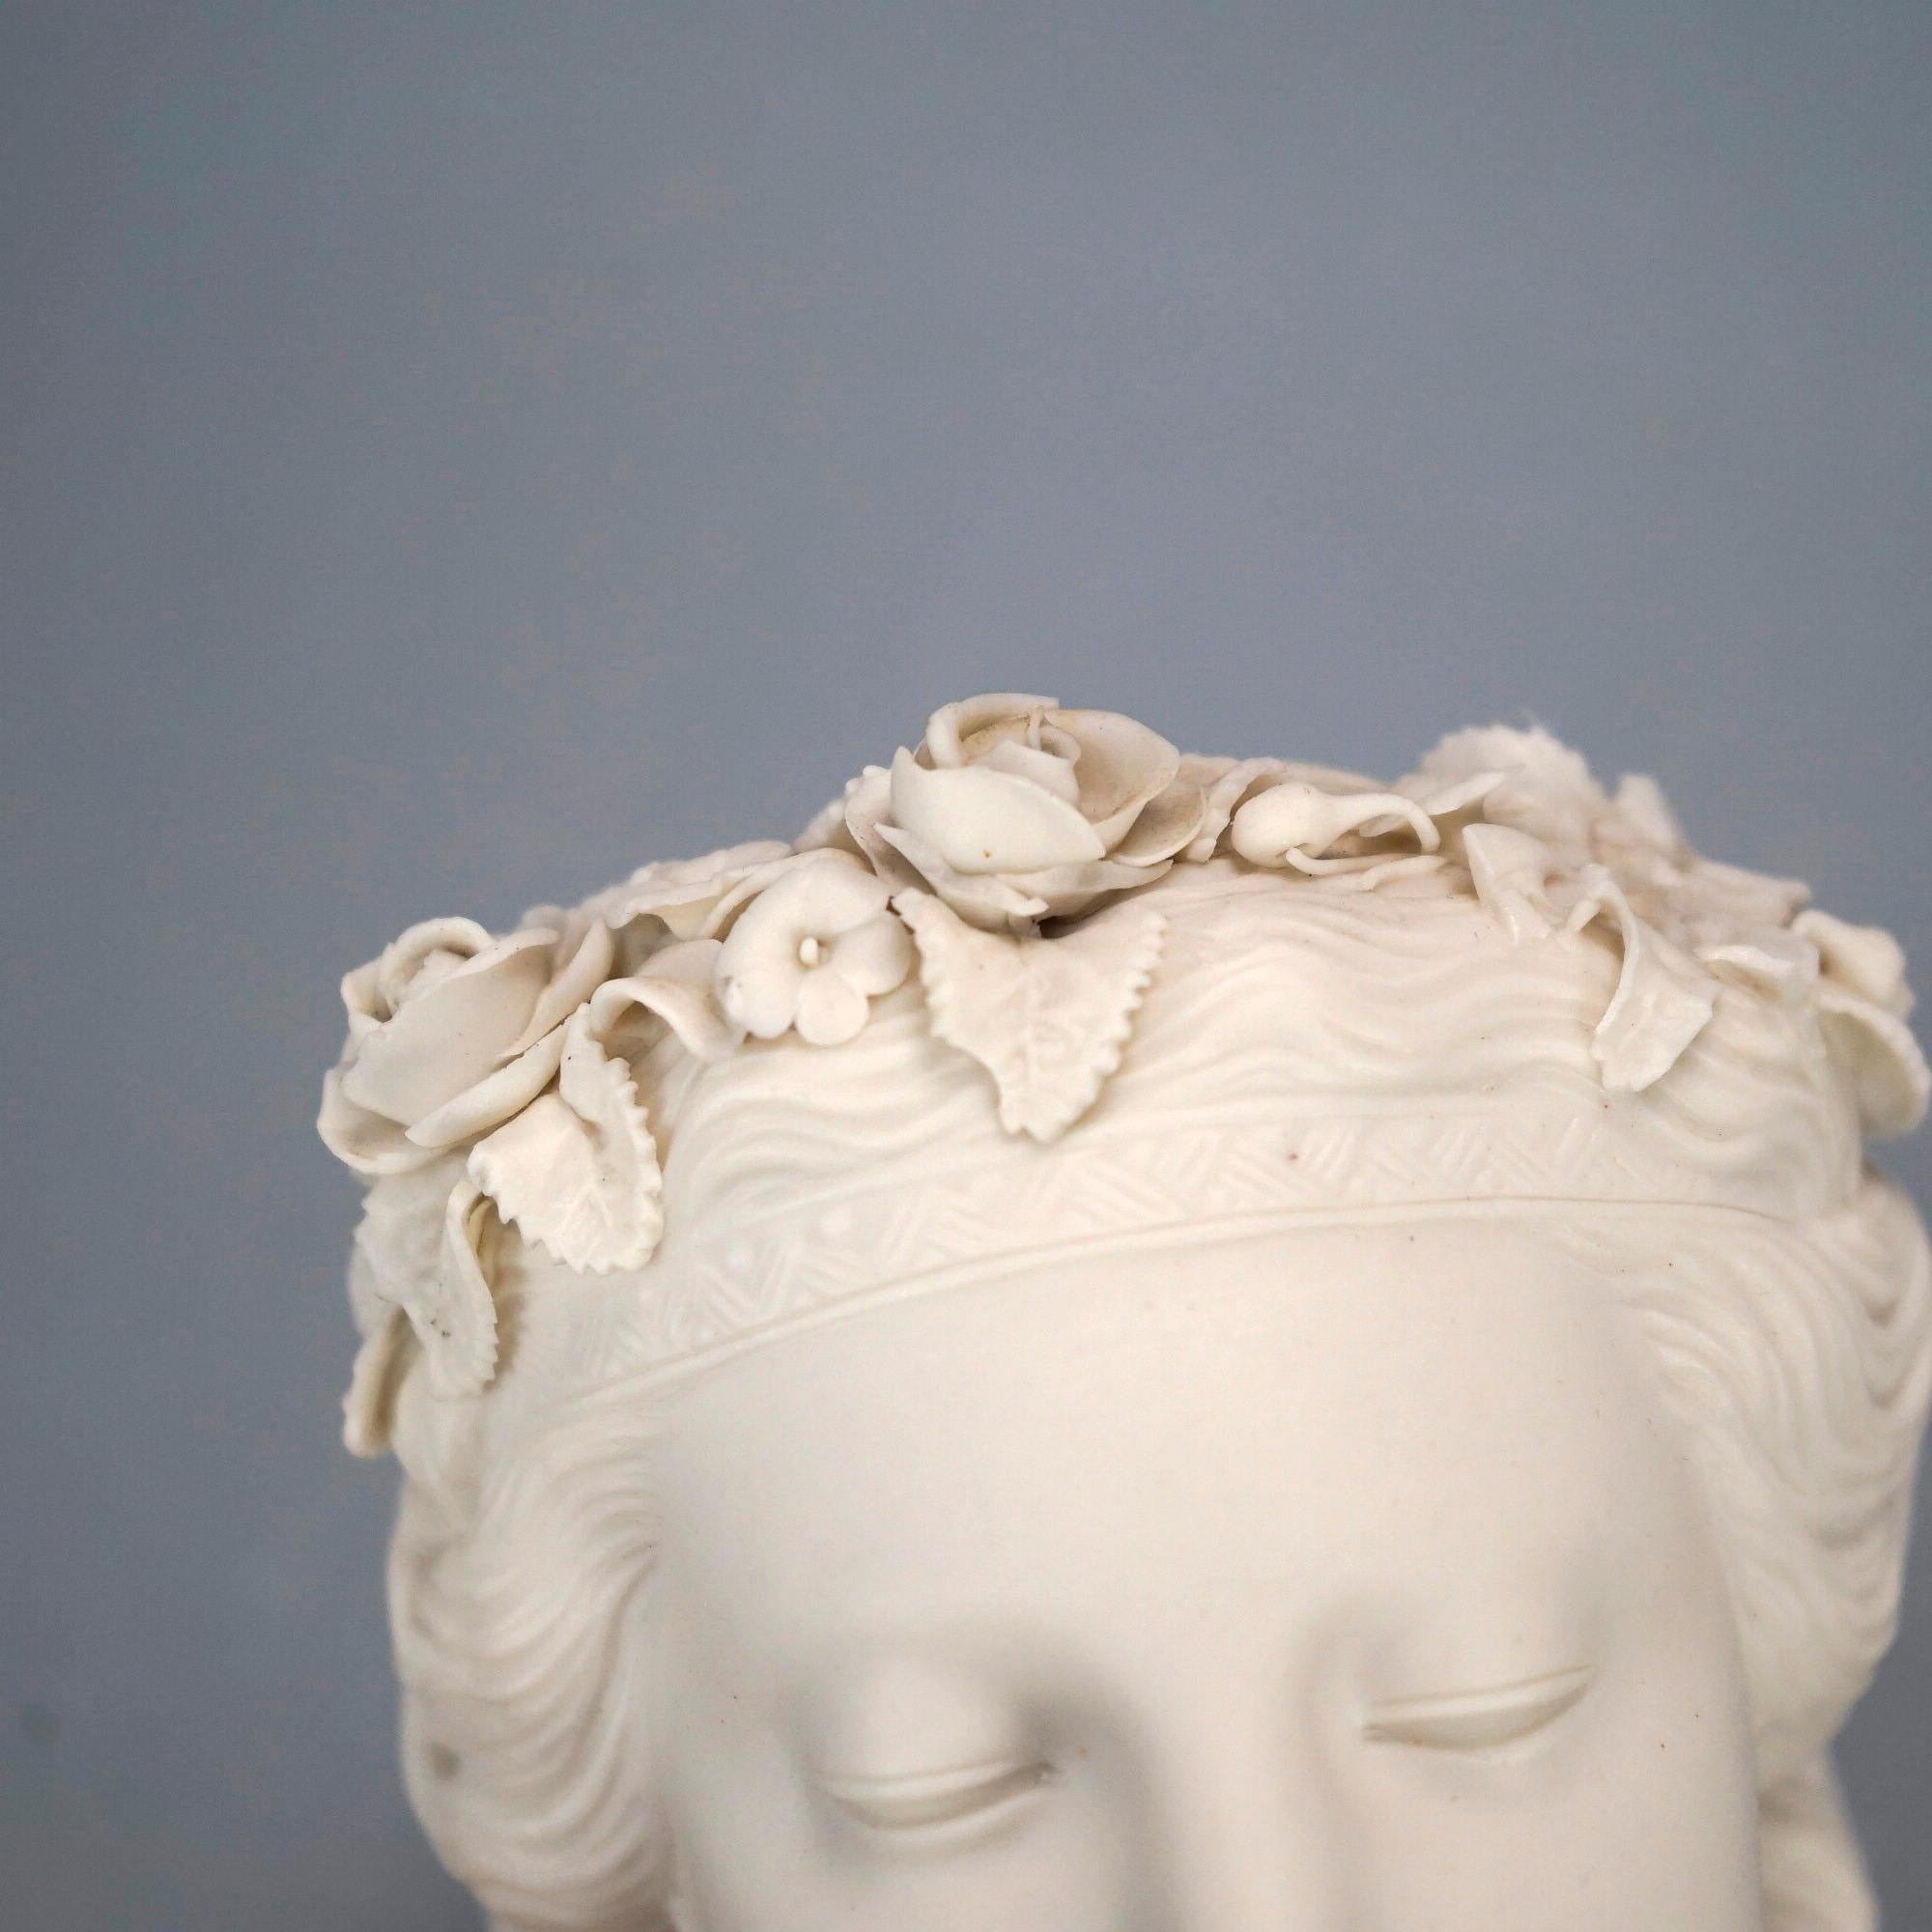 Antique Parian Sculpture Bust of a Classical Young Woman 19th C 8